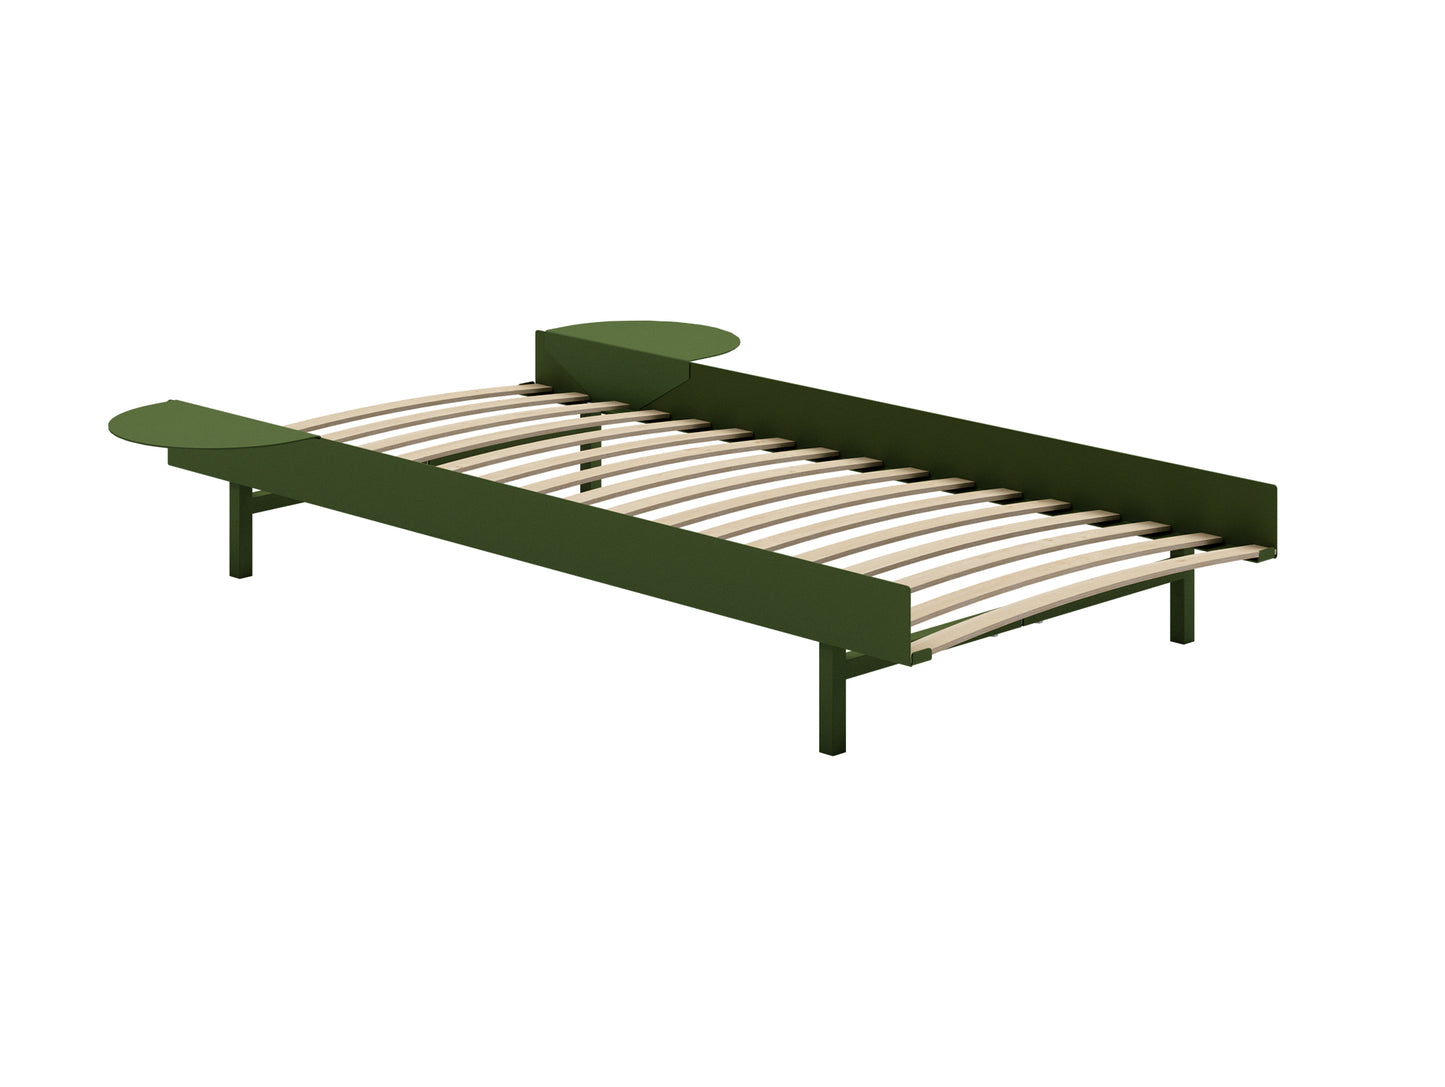 Bed 90 cm by Moebe - Pine Green / 2 side tables